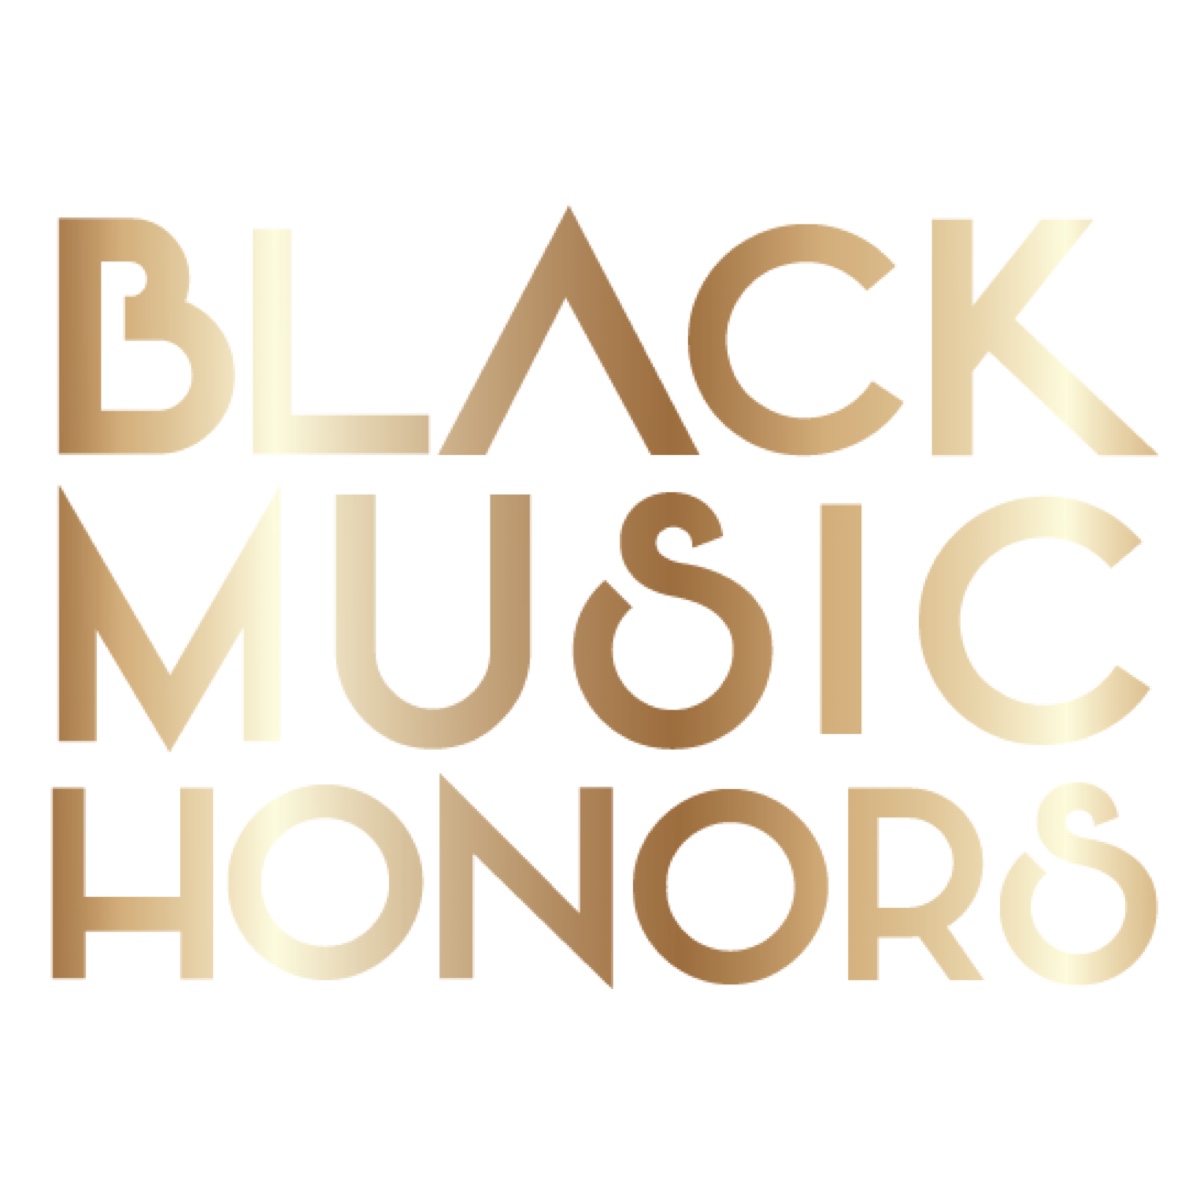 The 2021 Black Music Honors Will Be in Commemoration of